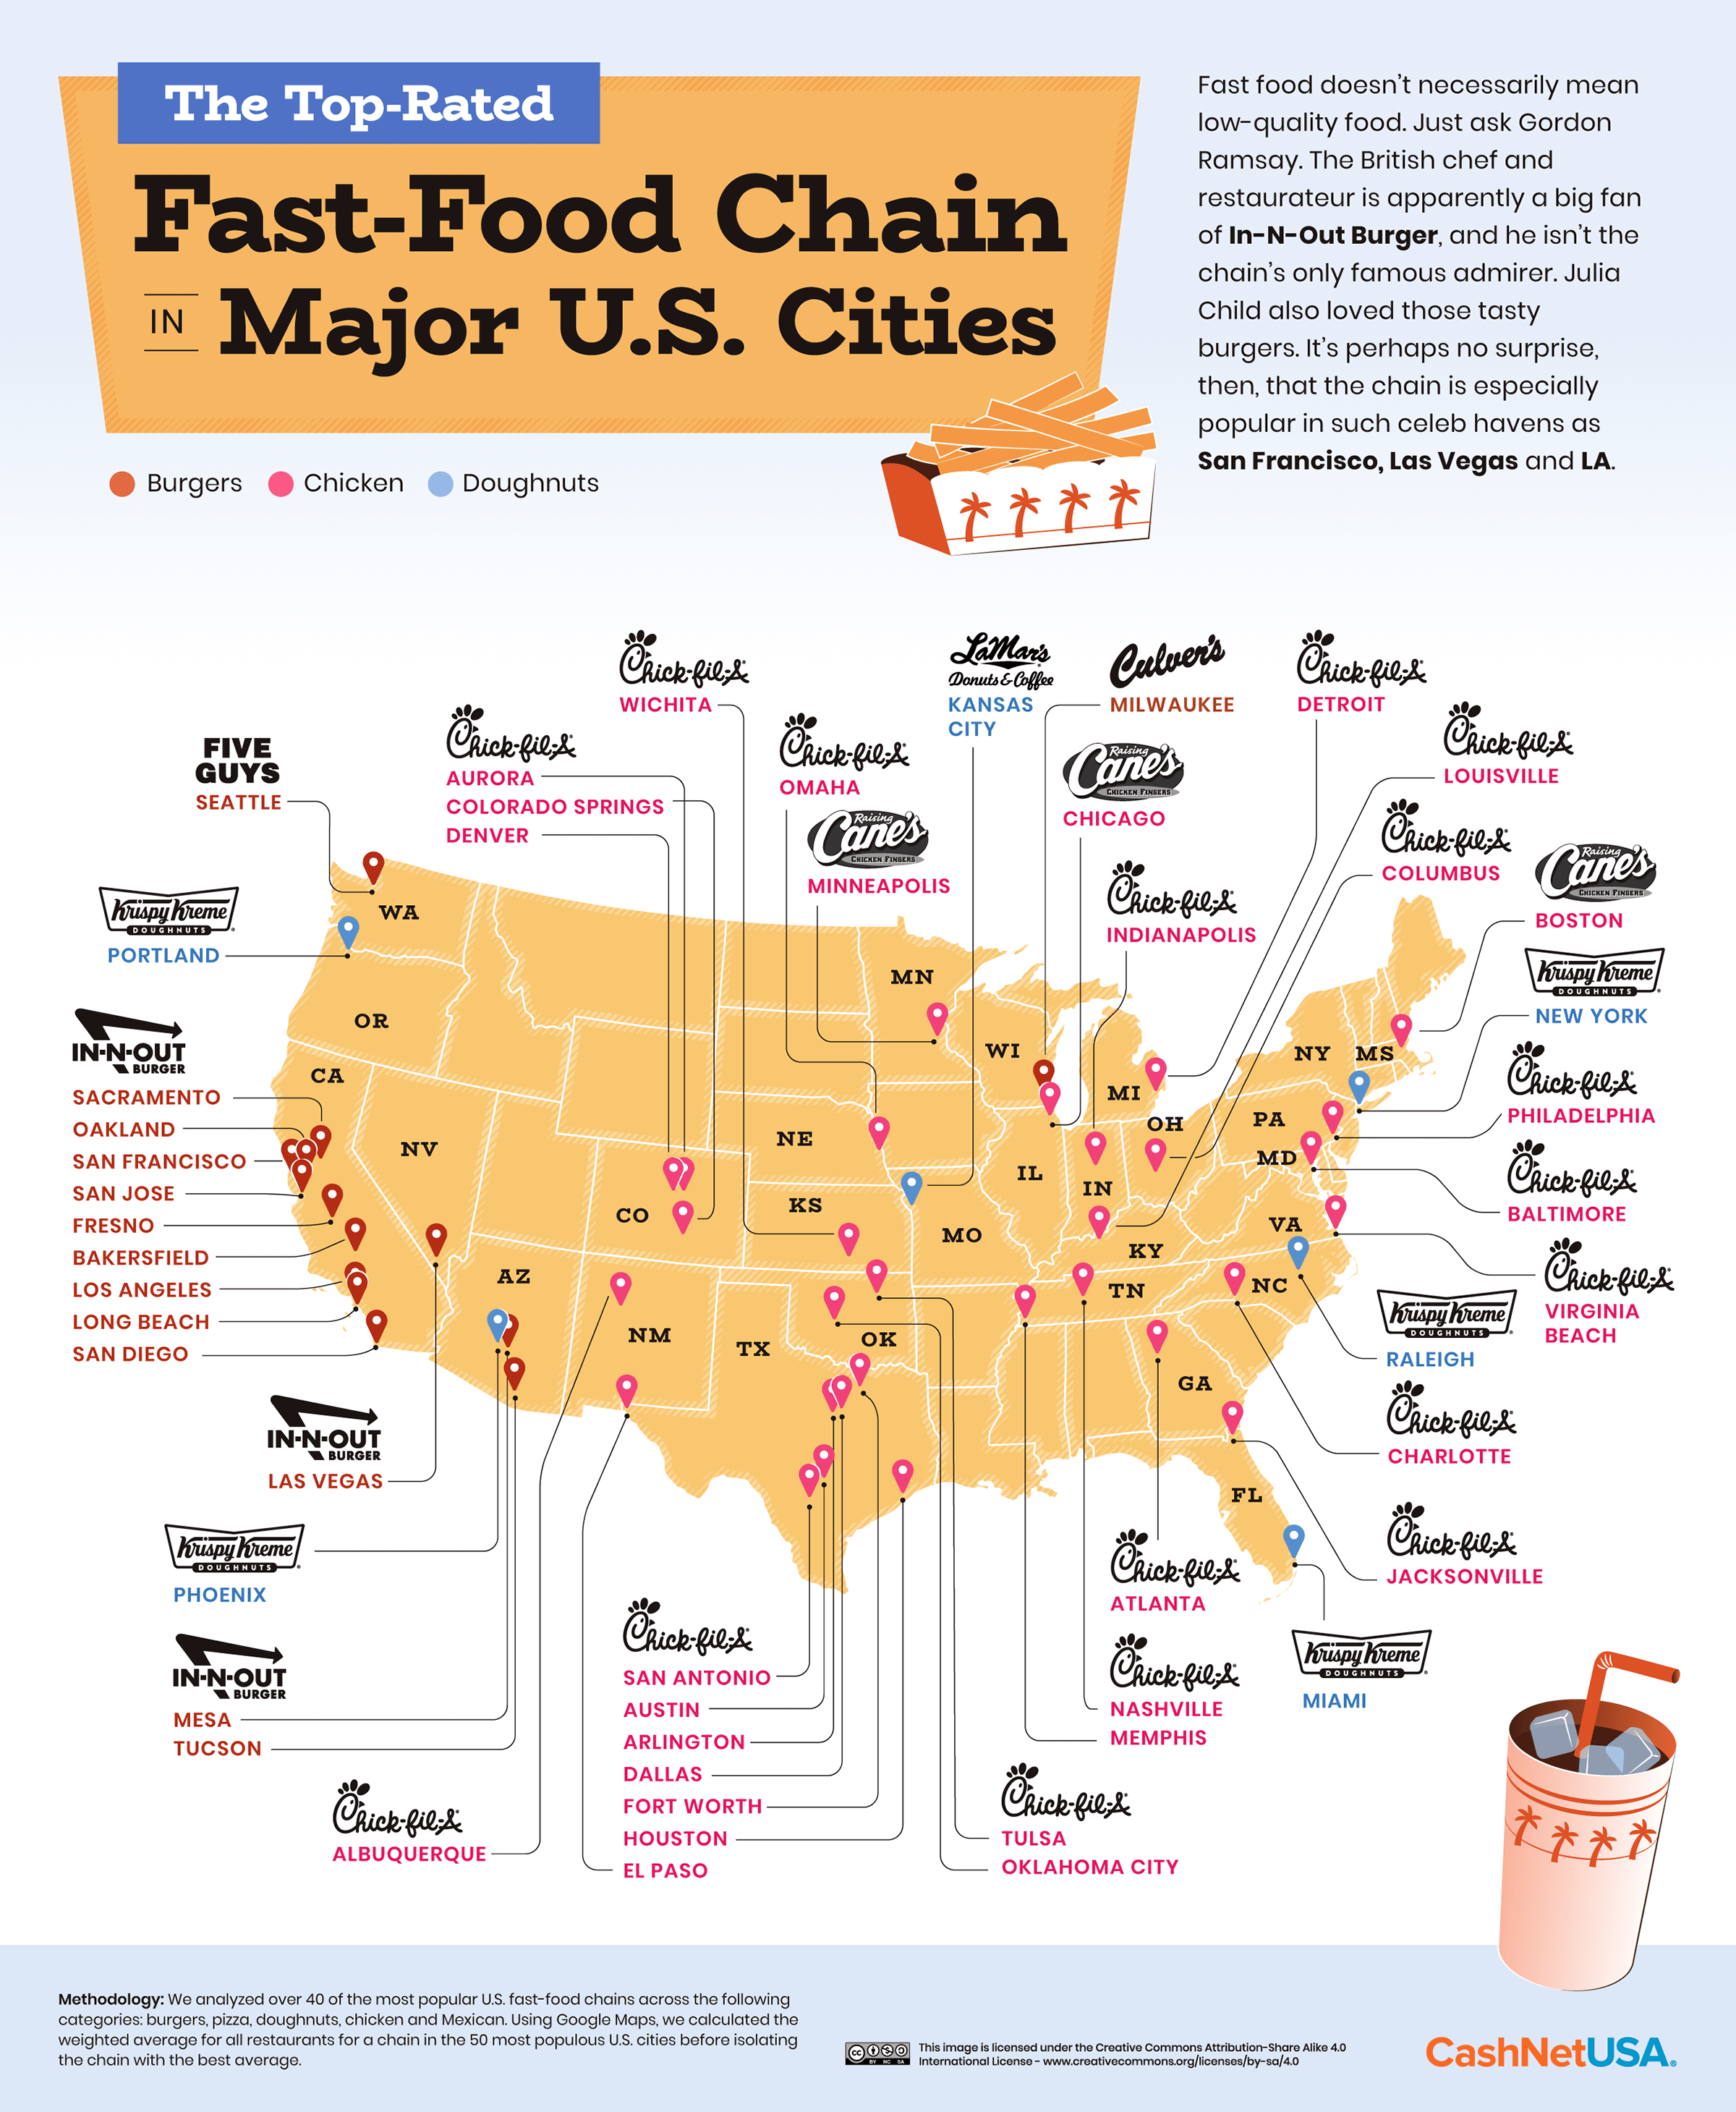 https://www.cashnetusa.com/blog/wp-content/uploads/sites/2/2022/10/03_Top-Rated-Fast-Food-Chains_US-Cities_Map_Hi-RES.png